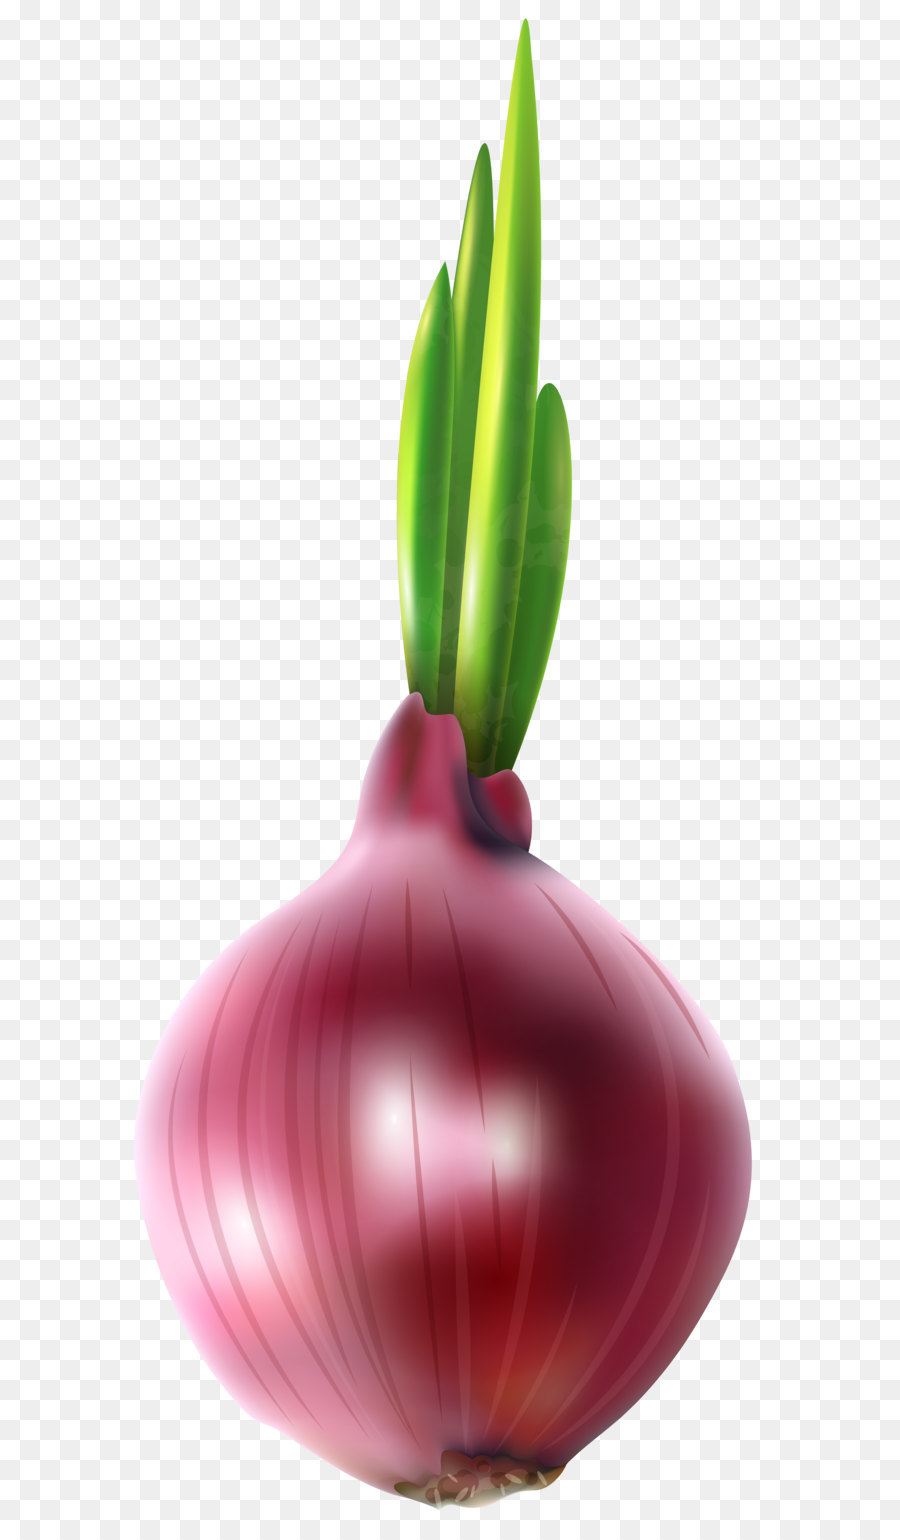 Onion Computer file - Red Onion Free PNG Clip Art Image png download - 3398*8000 - Free Transparent Blooming Onion png Download.